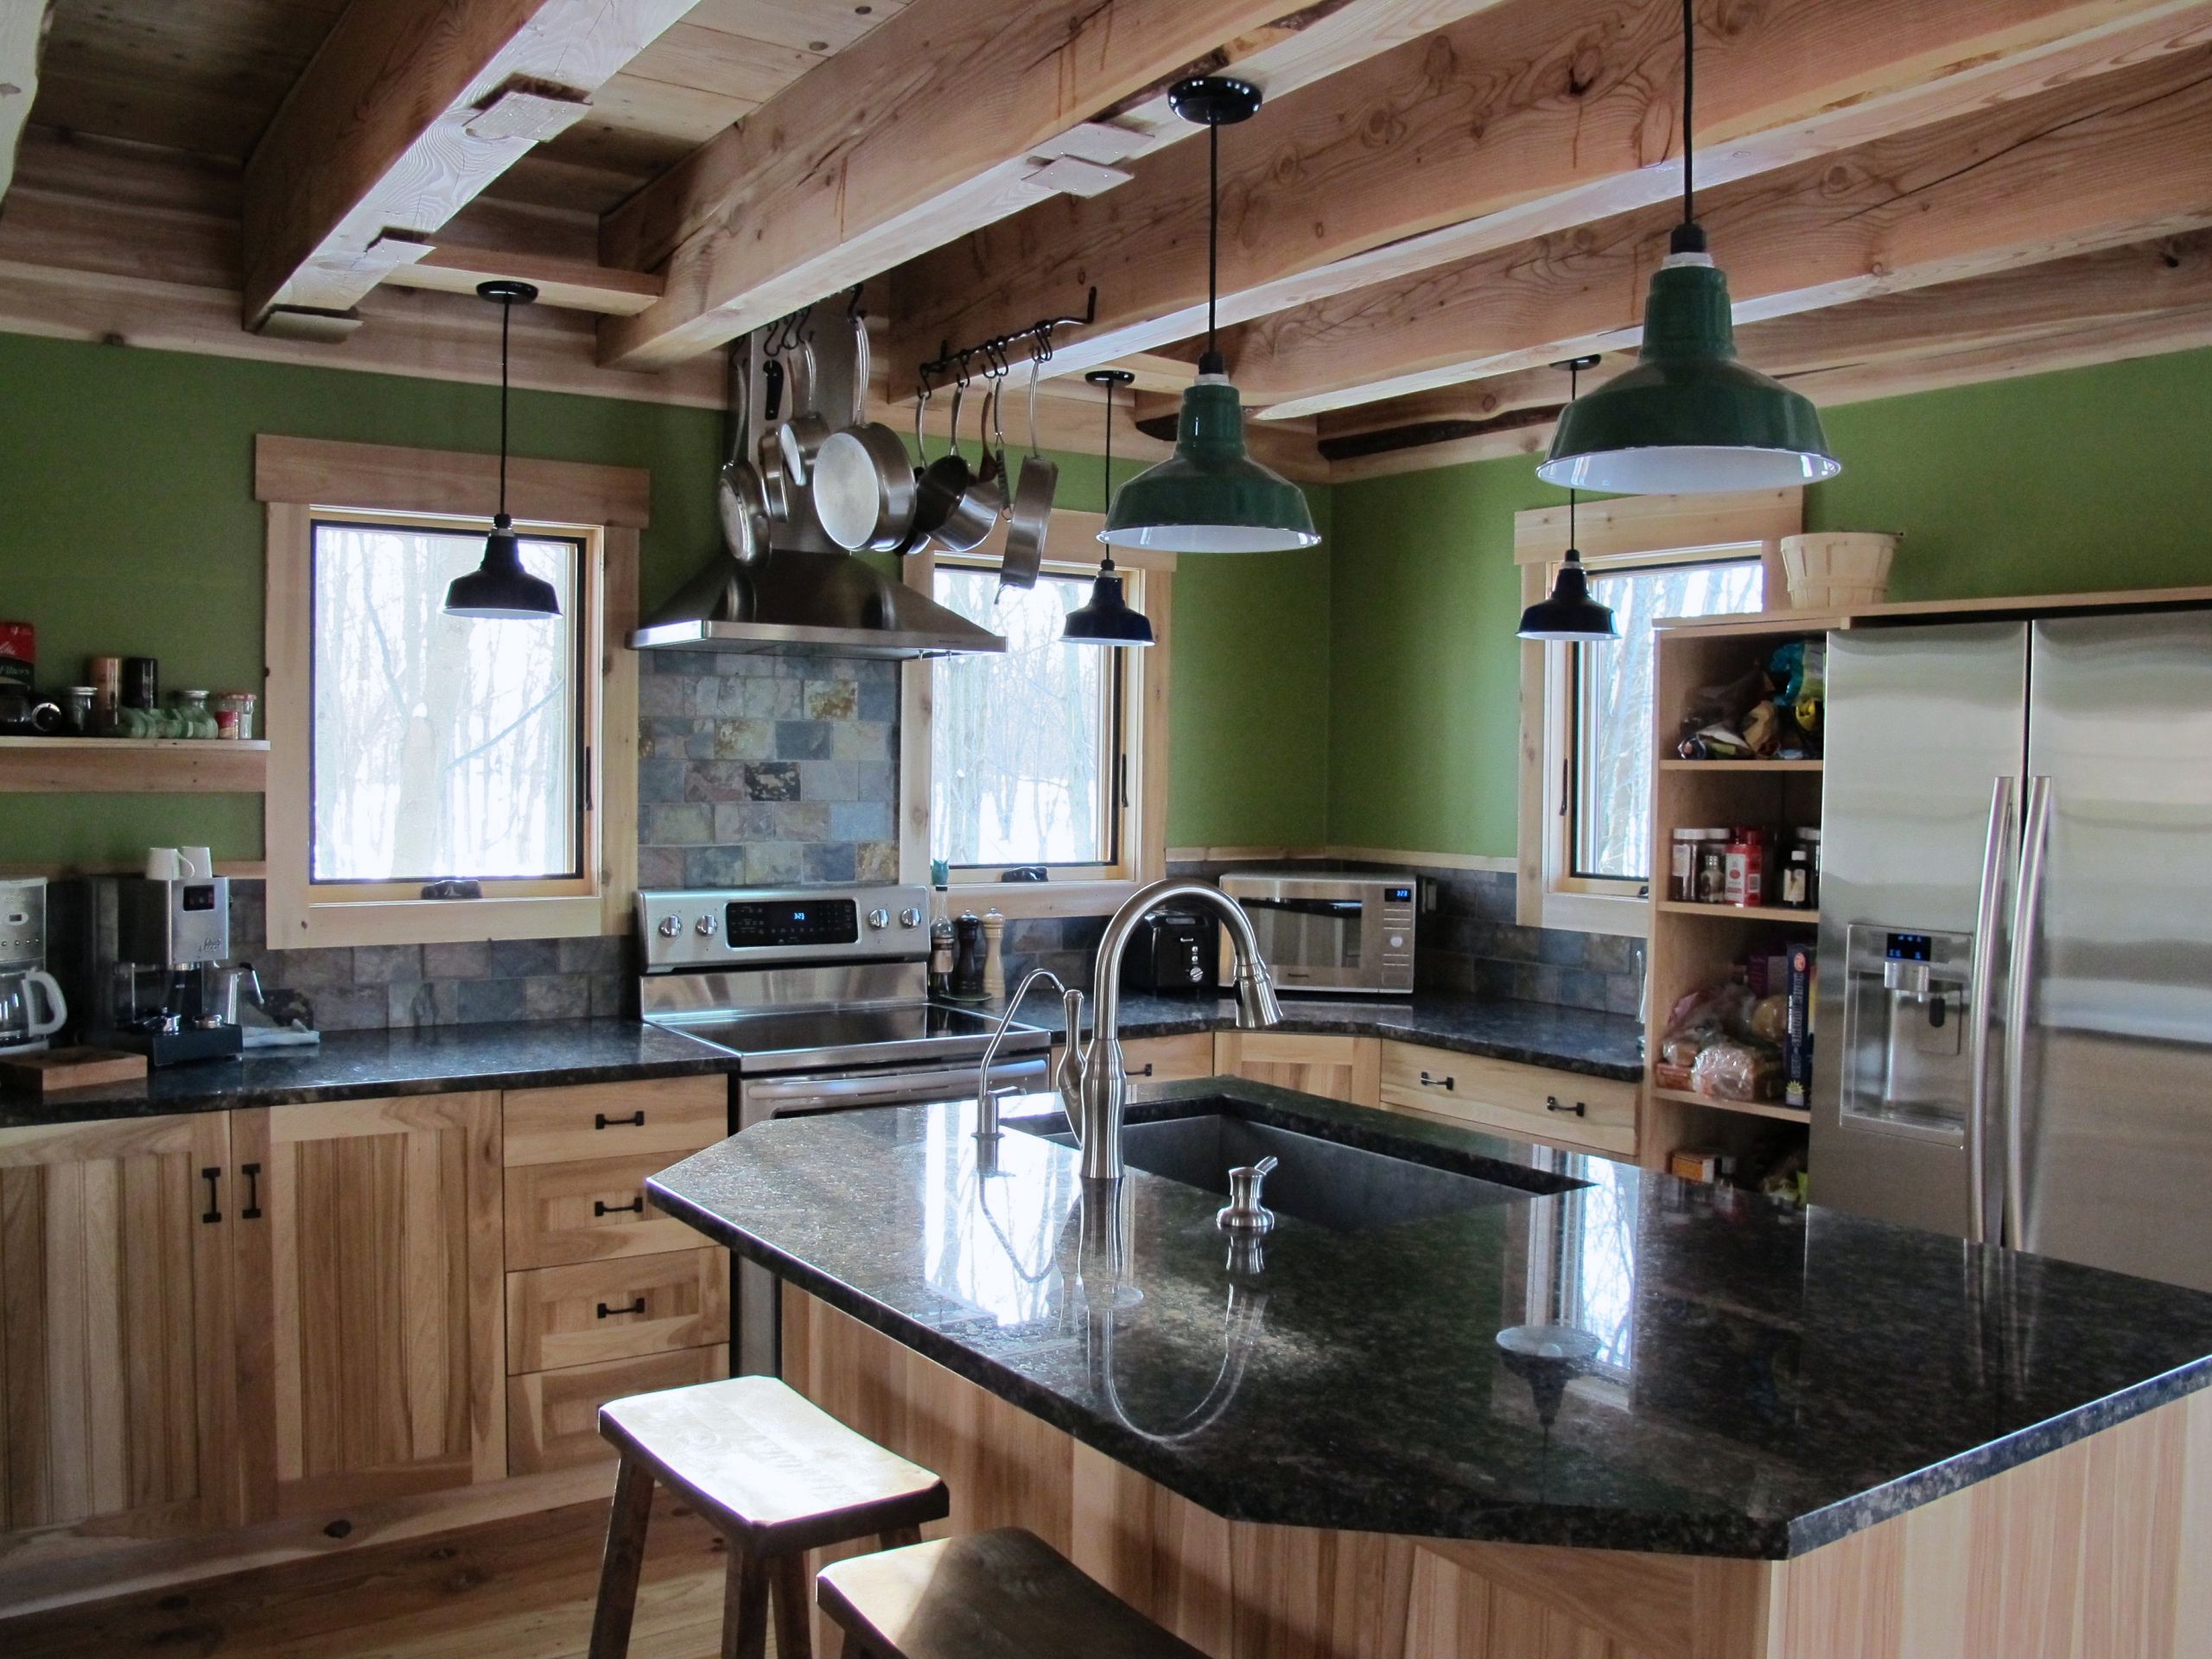 Rustic Kitchen Lighting
 Porcelain Barn Lights Give Rustic Look to Farmhouse